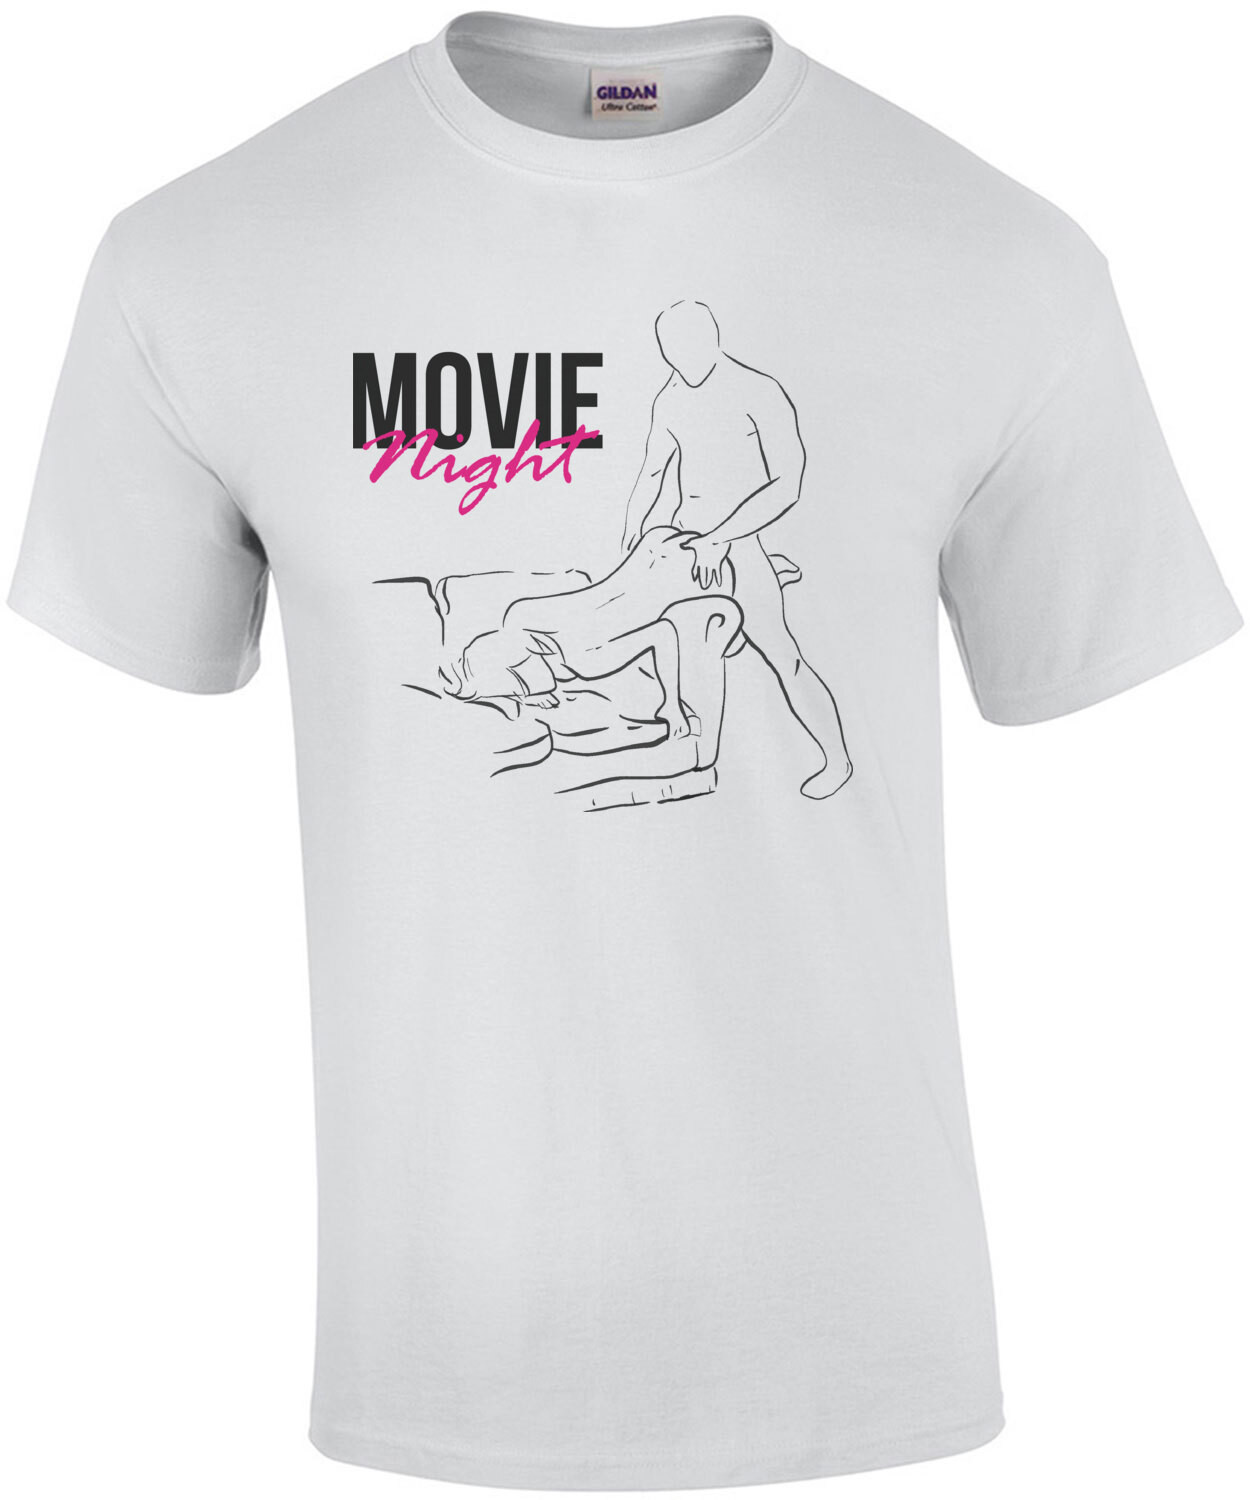 Movie Night - Sexual Offensive T-Shirt